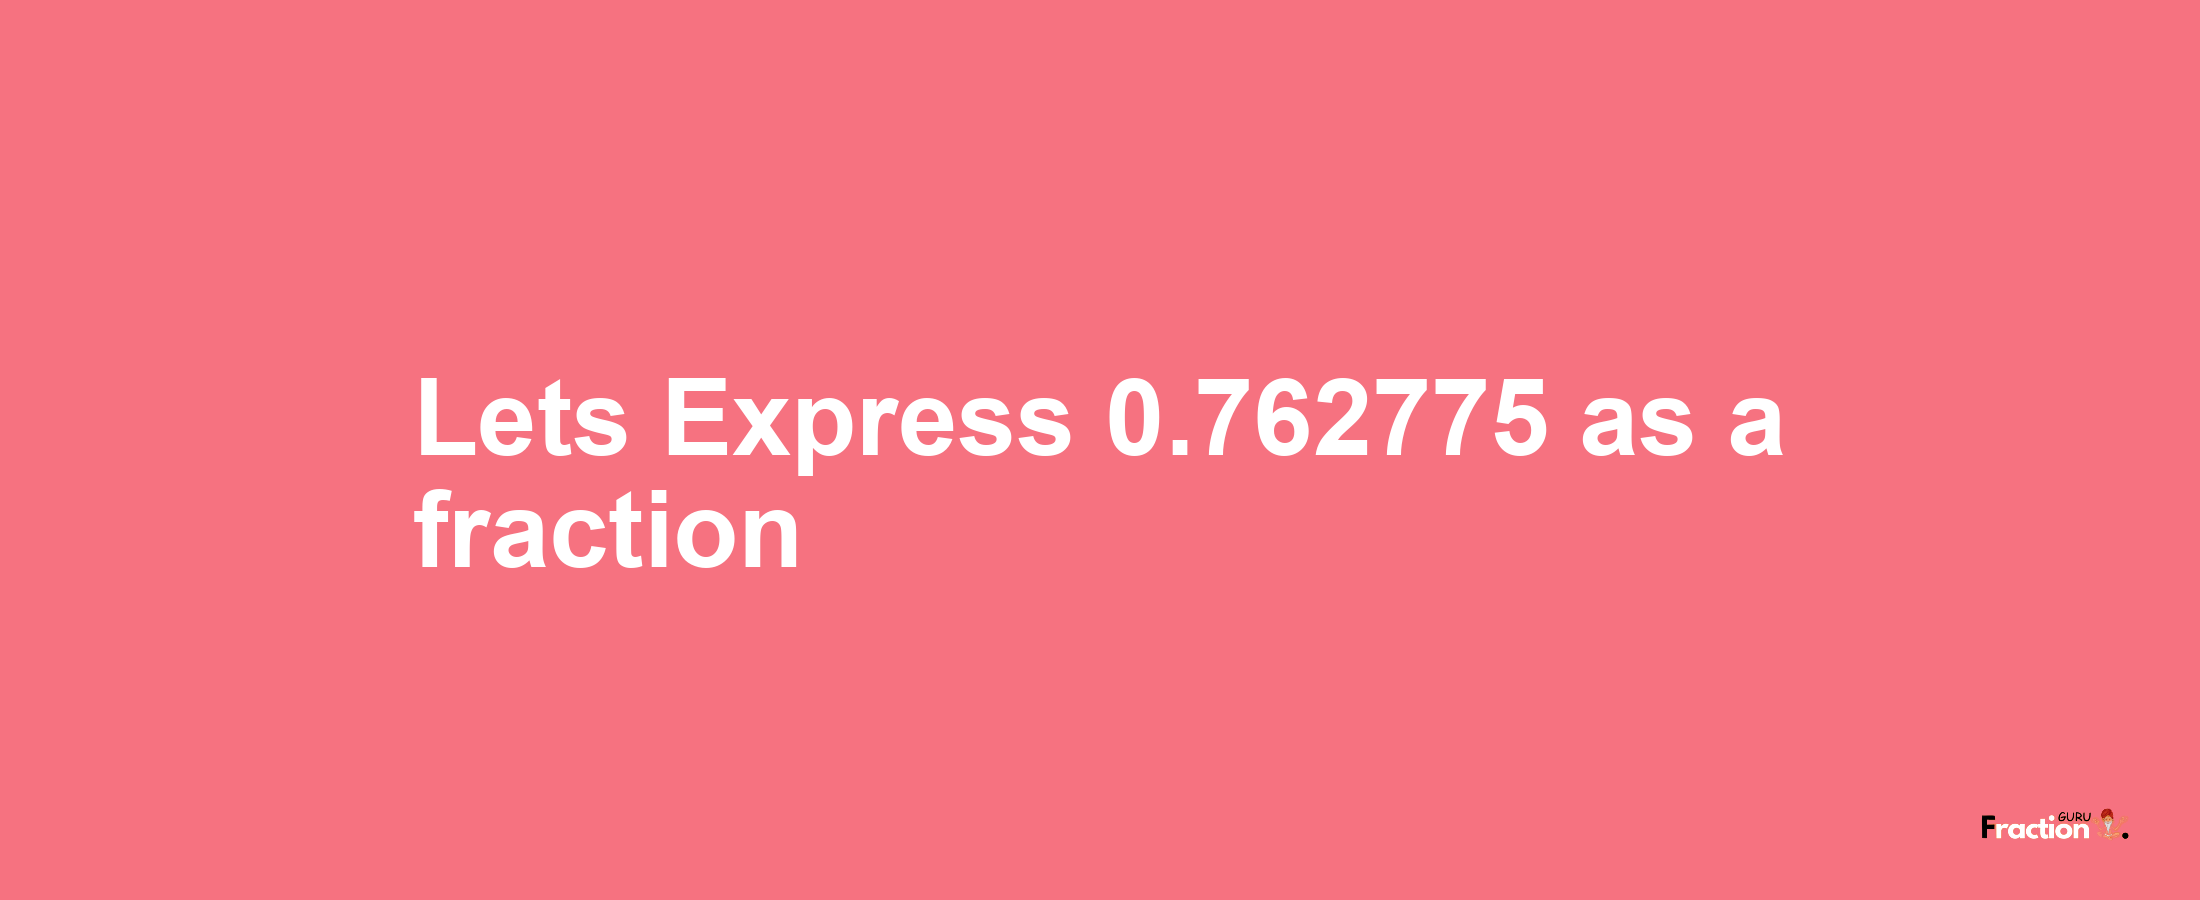 Lets Express 0.762775 as afraction